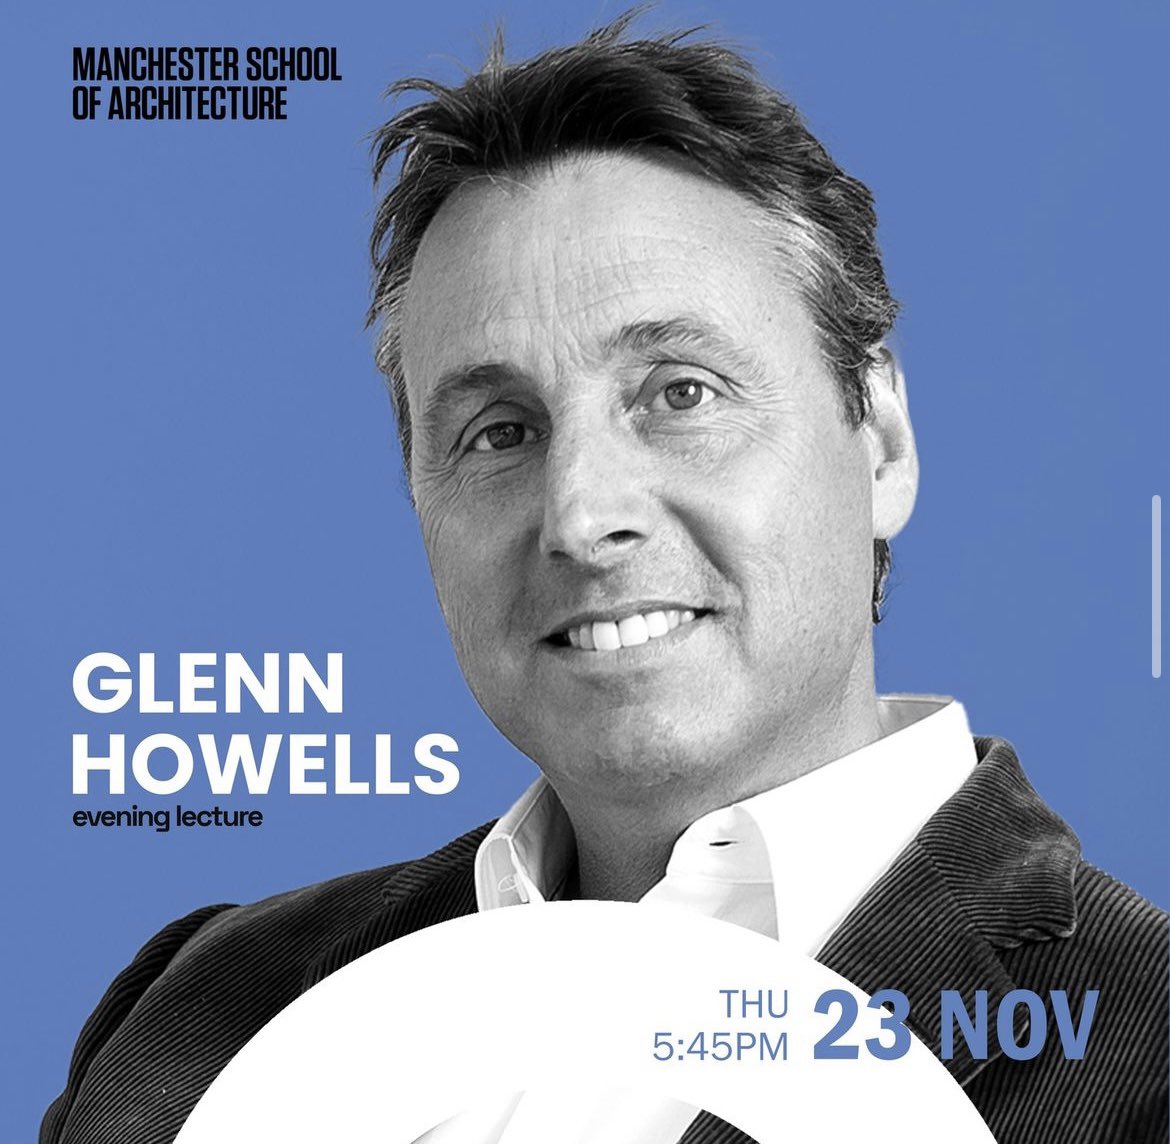 Glenn Howells of @howells_makes speaking at @TheMSArch on Thursday 23rd Nov at 5.45pm at @ManMetUni Geoffrey Manton building - all welcome!